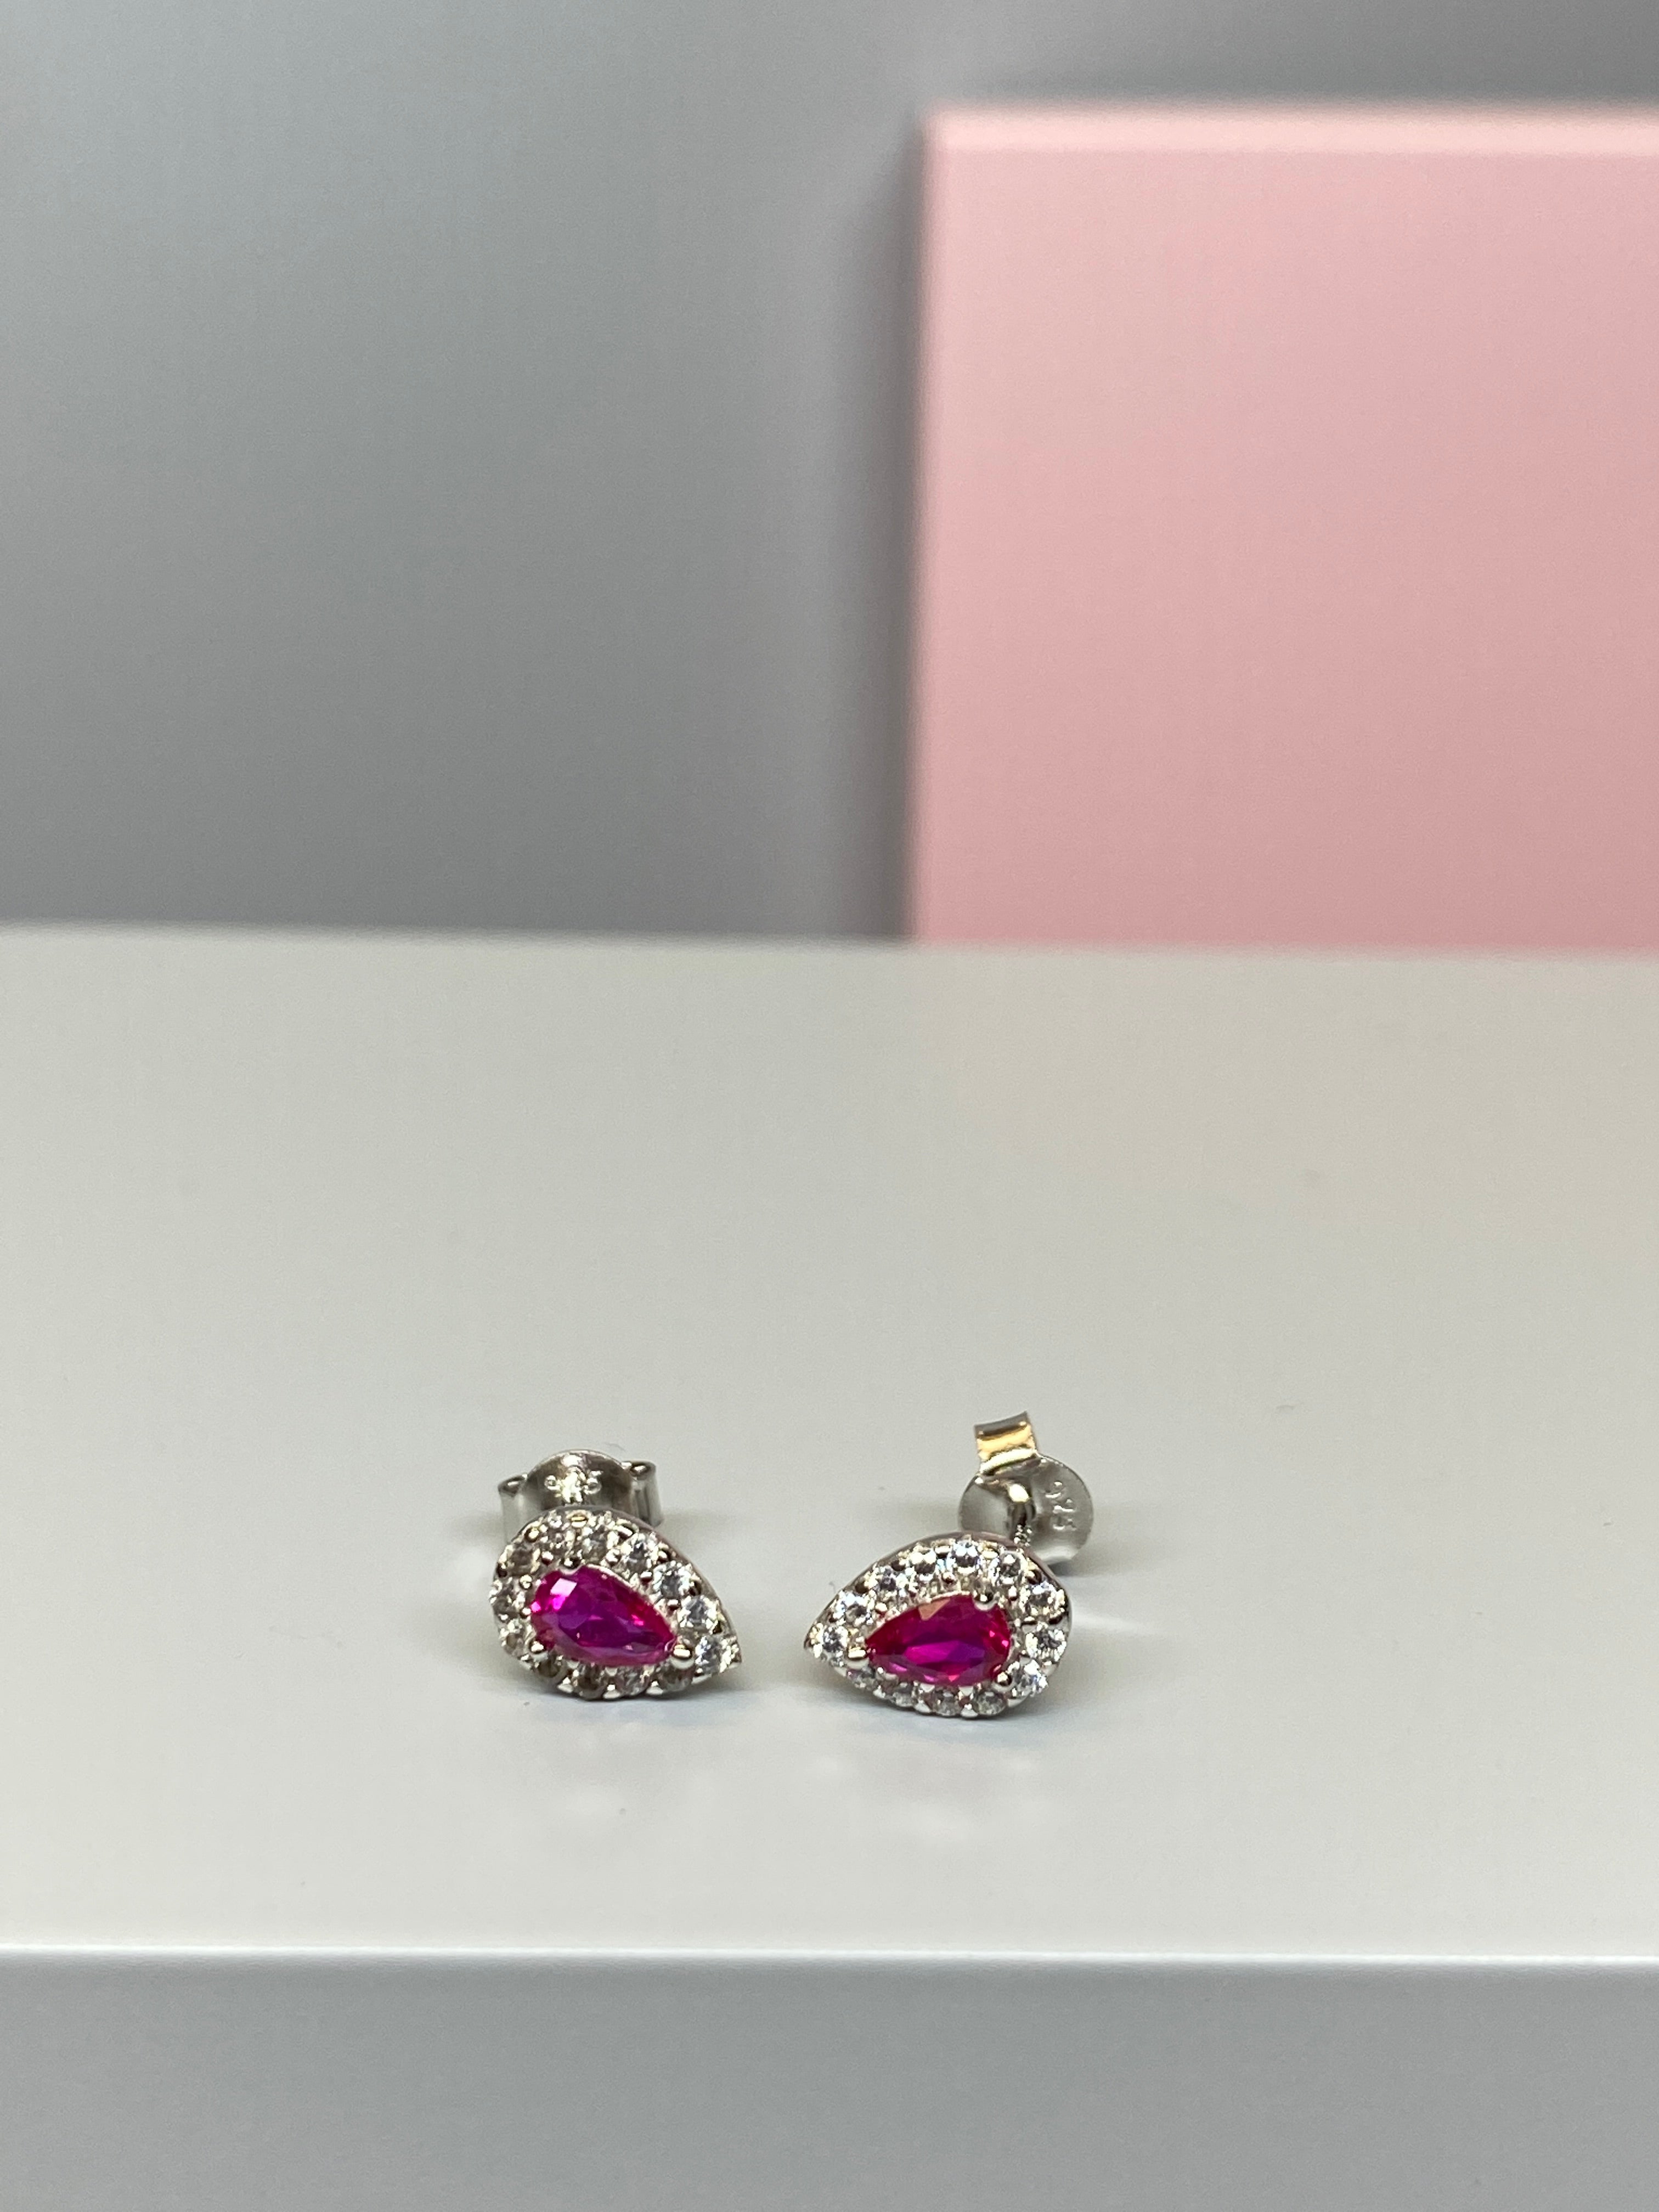 Sterling Silver Pear Shaped Pink and CZ Earrings - Hallmark Jewellers Formby & The Jewellers Bench Widnes